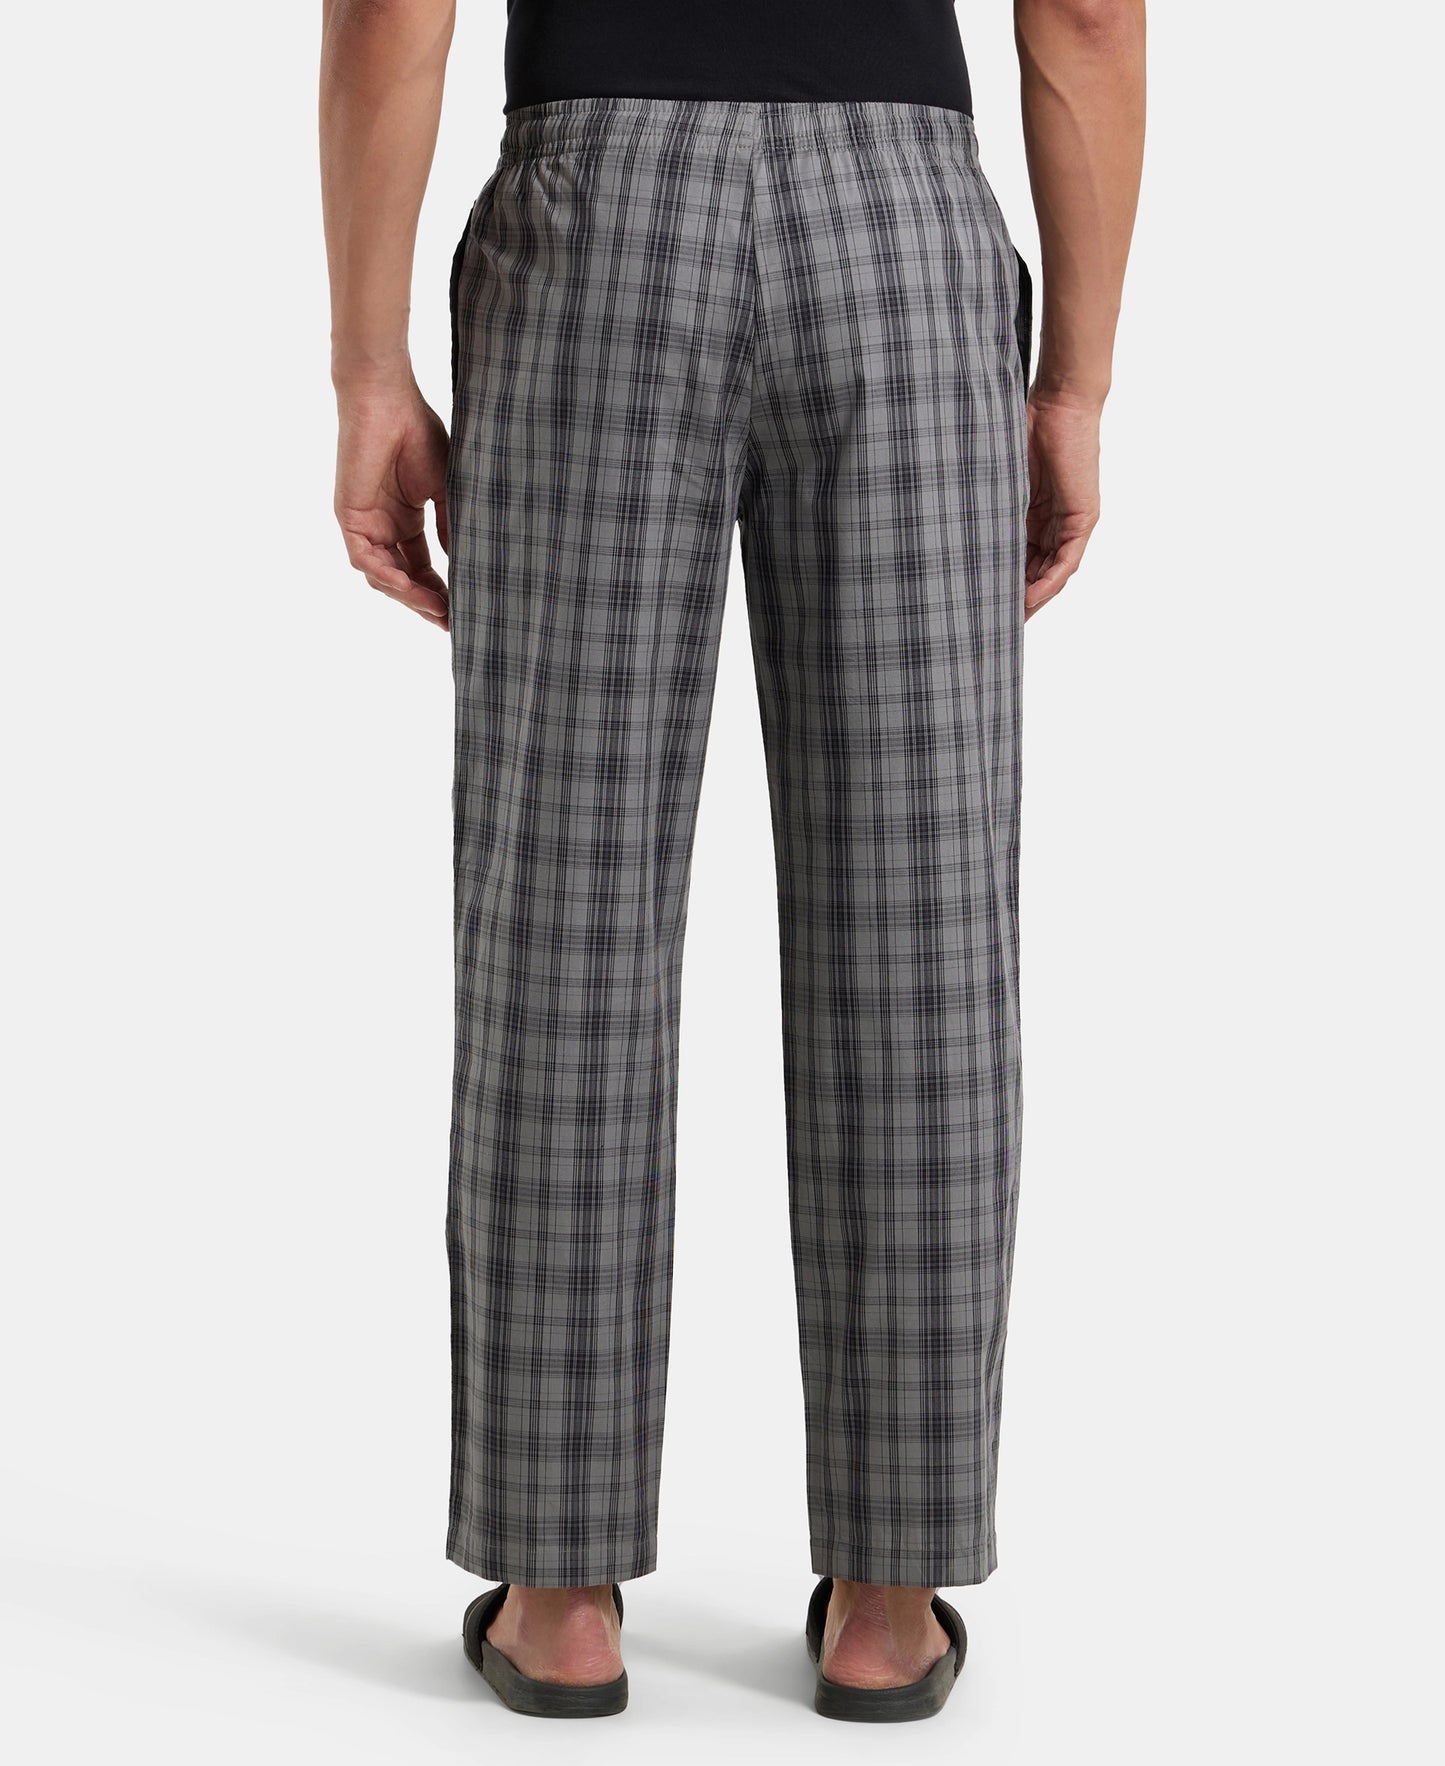 Super Combed Cotton Woven Fabric Regular Fit Checkered Pyjama with Side Pockets - Quiet Shade